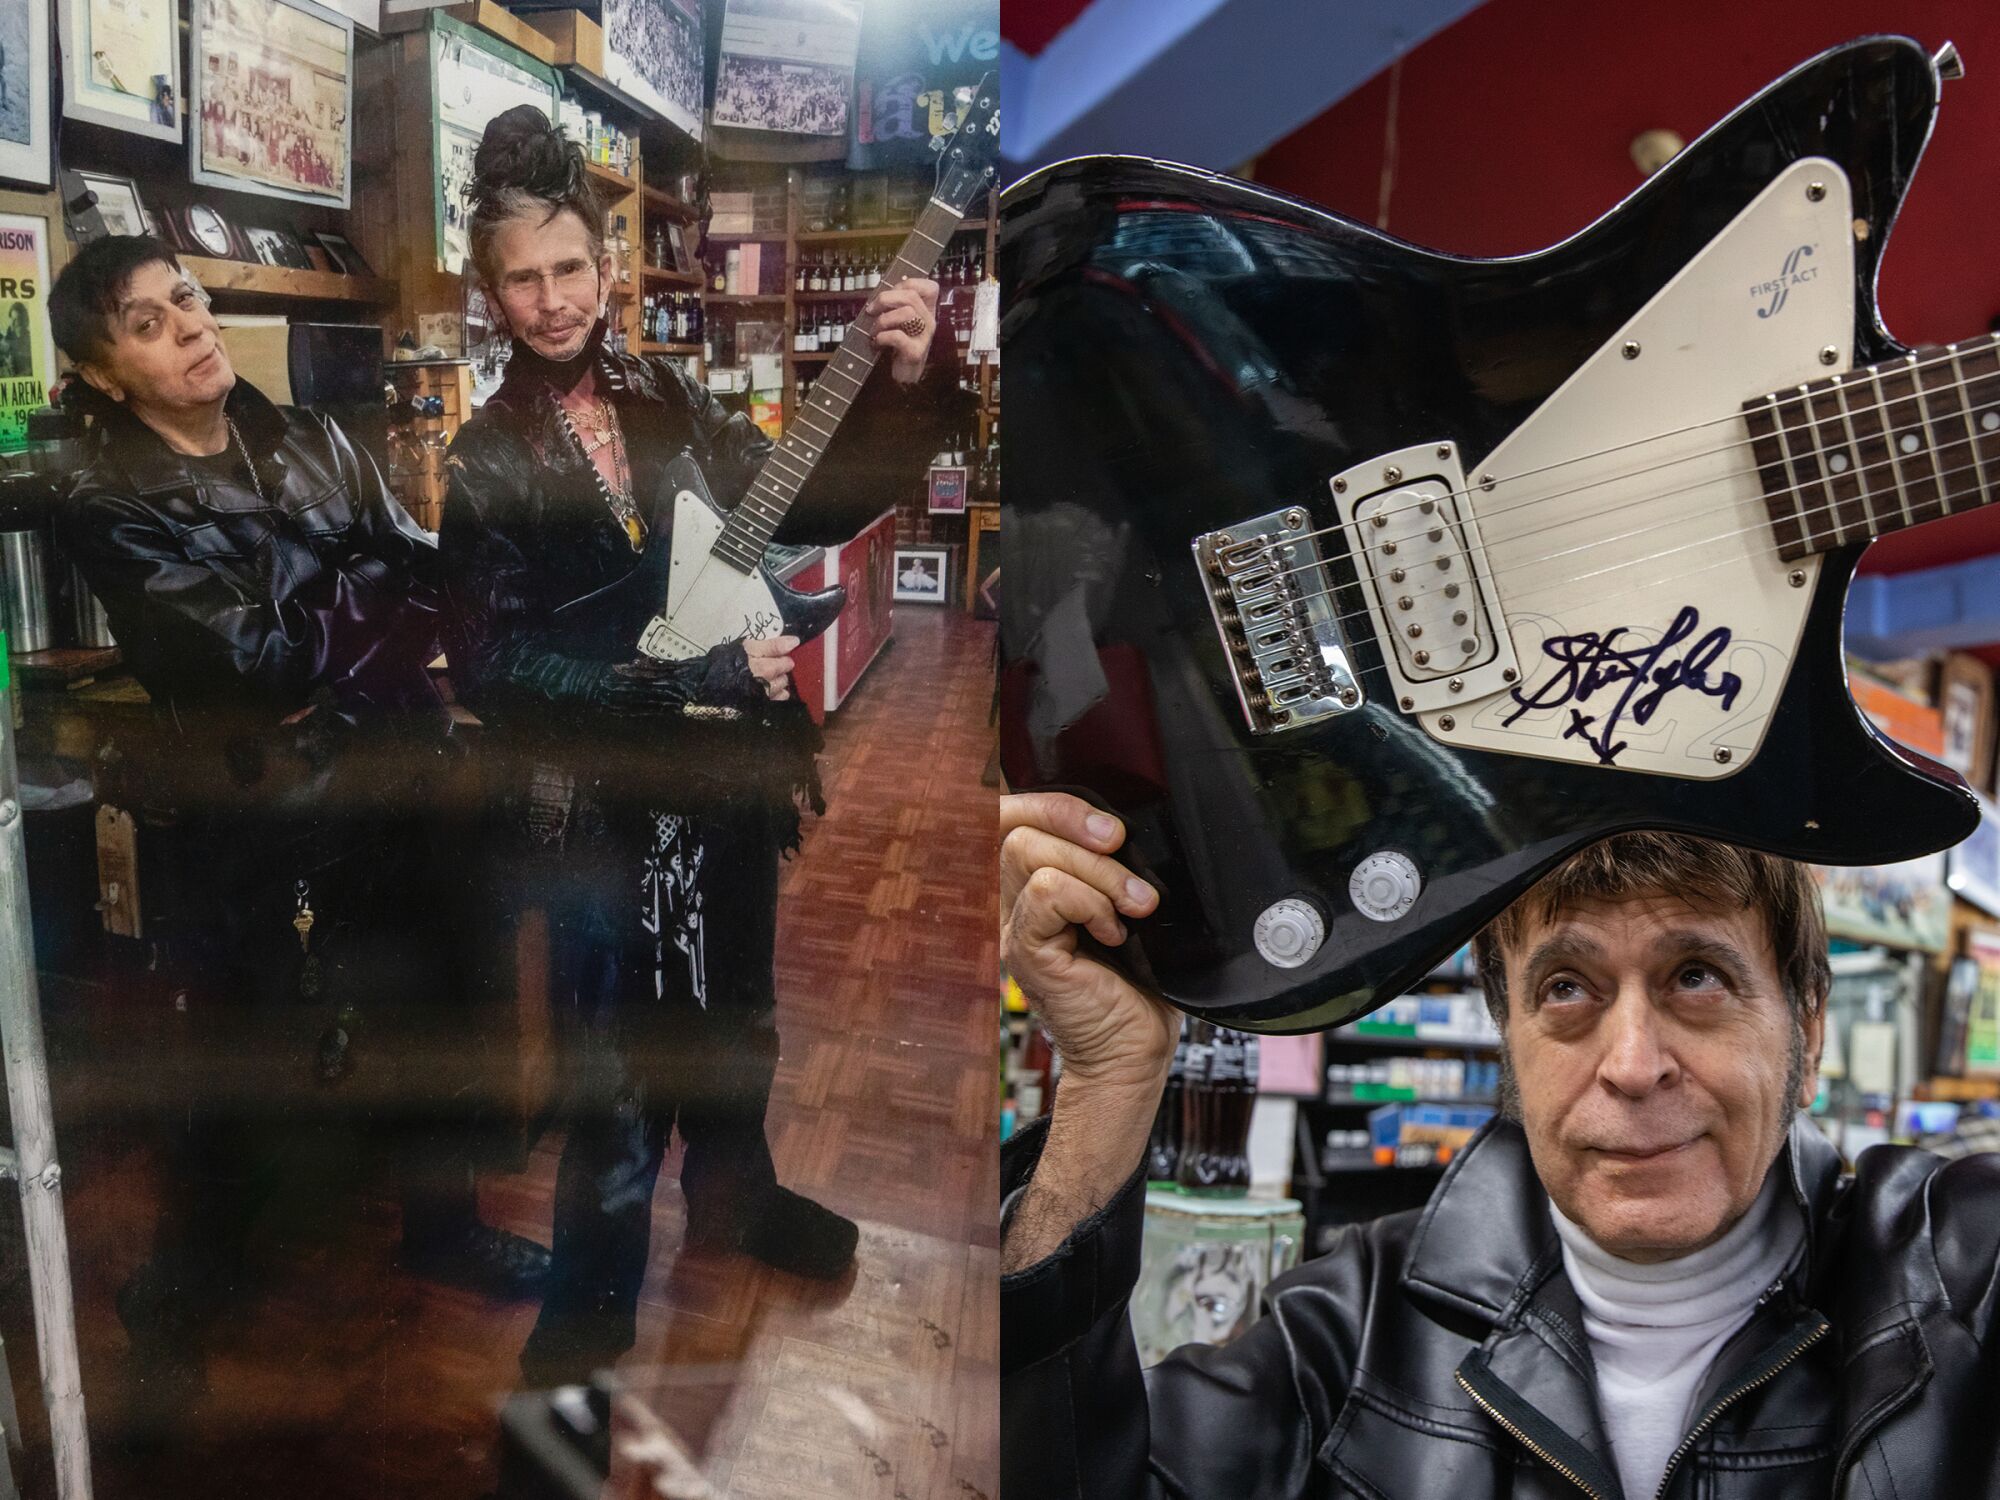 Two photos side by side, one of a photo of Tommy Bina and Steven Tyler, and the other of Bina holding up a signed guitar.